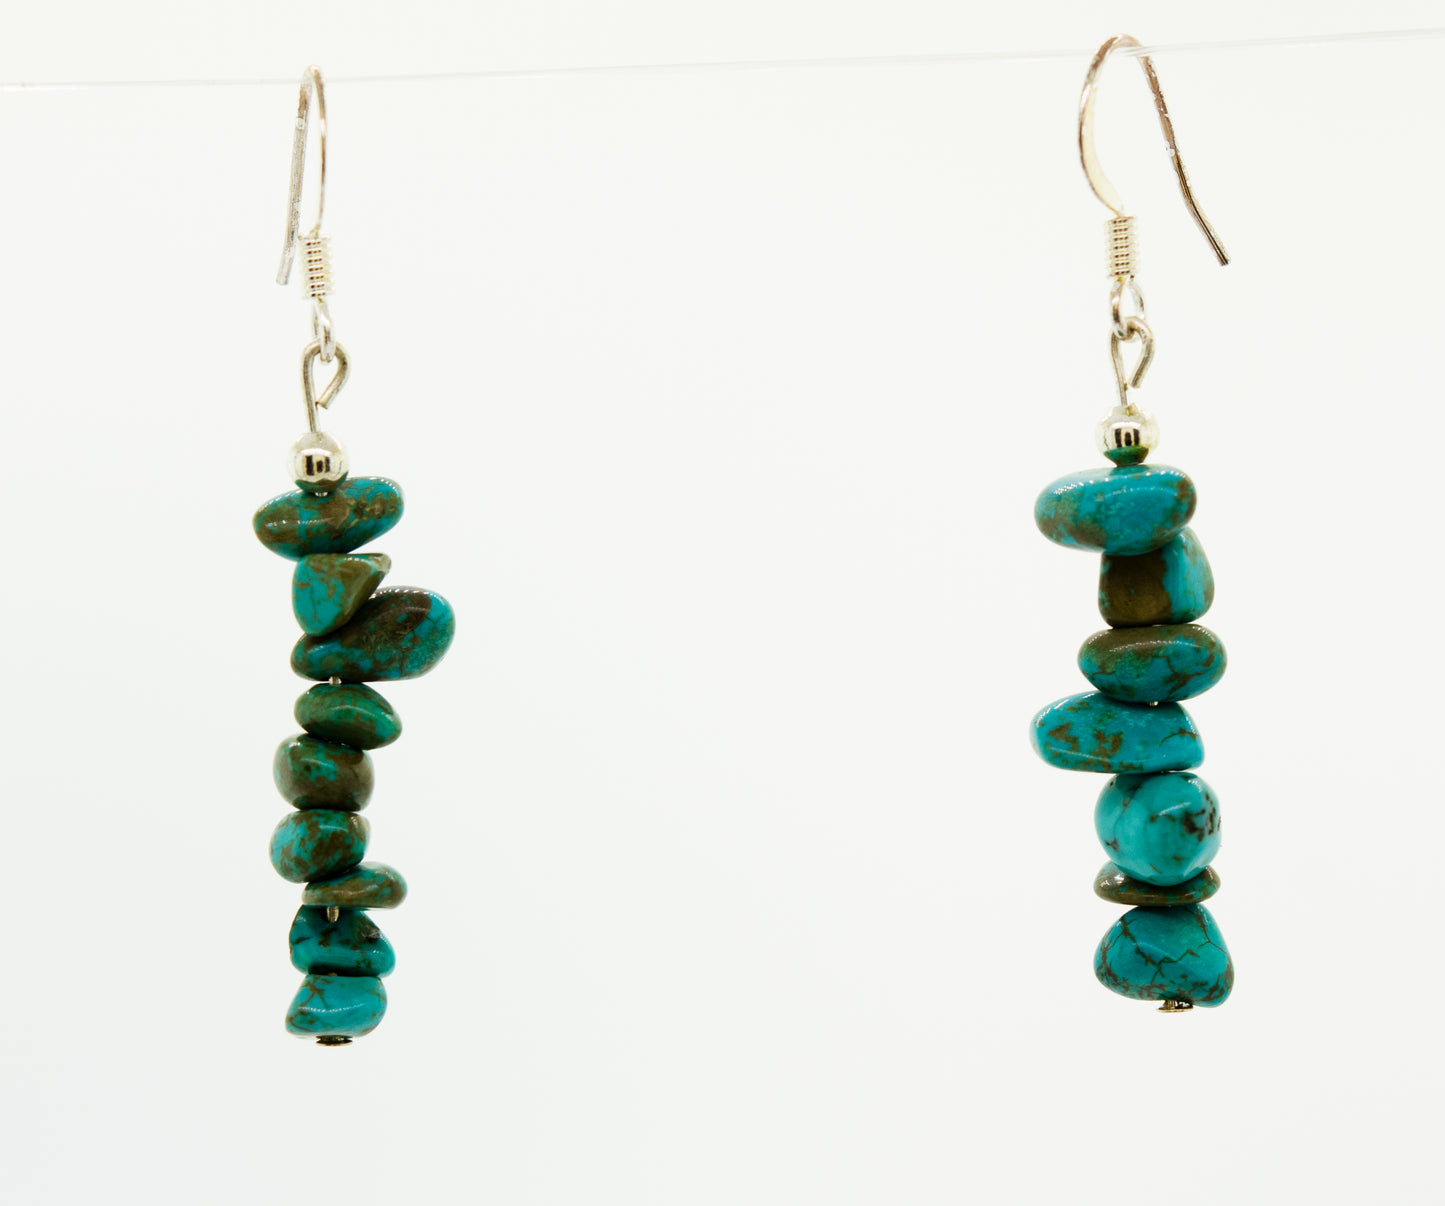 A pair of Super Silver American Made Colorado Turquoise earrings on a white background.